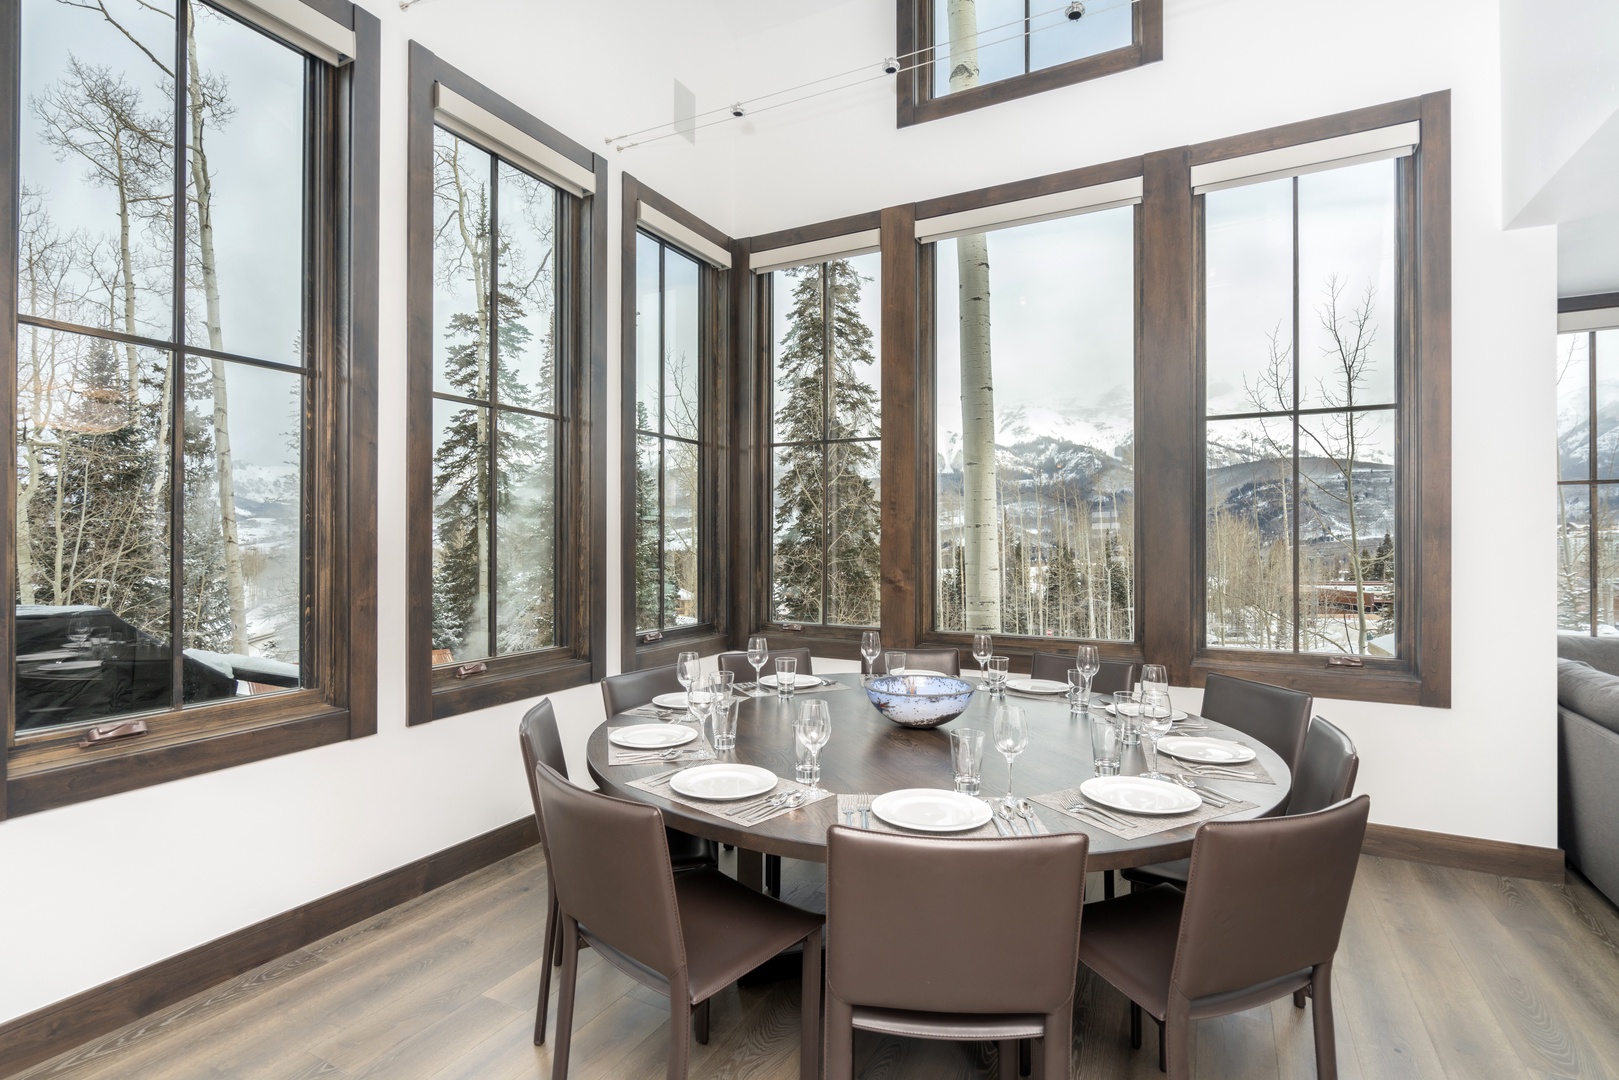 This mountain modern home has it all - dining for 8